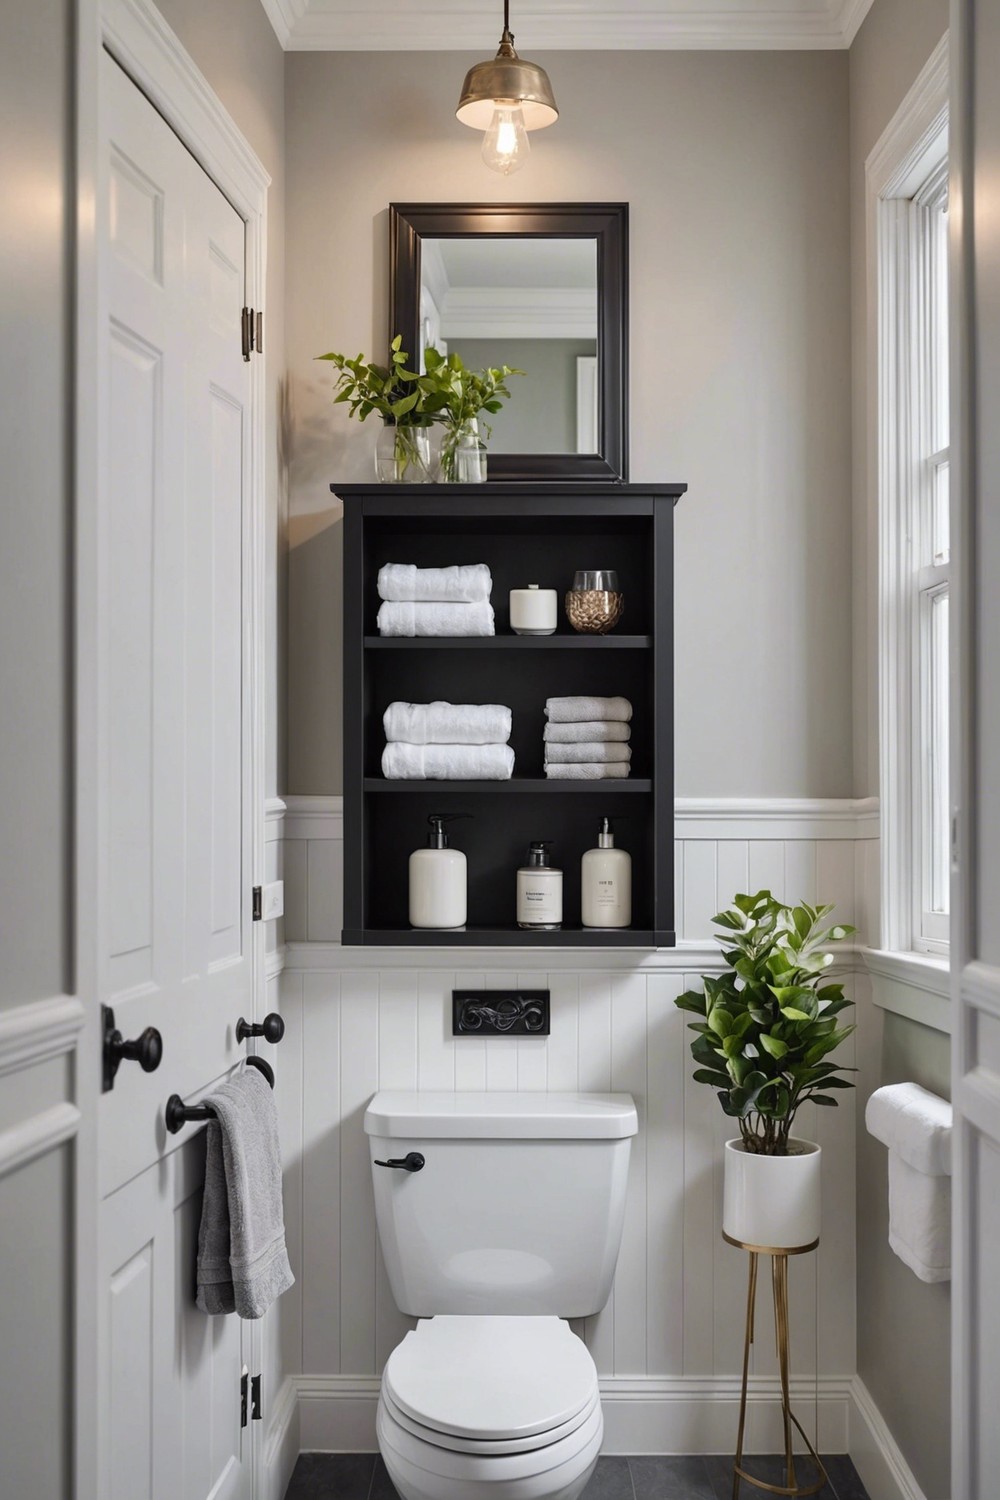 Utilize the Space Above the Toilet